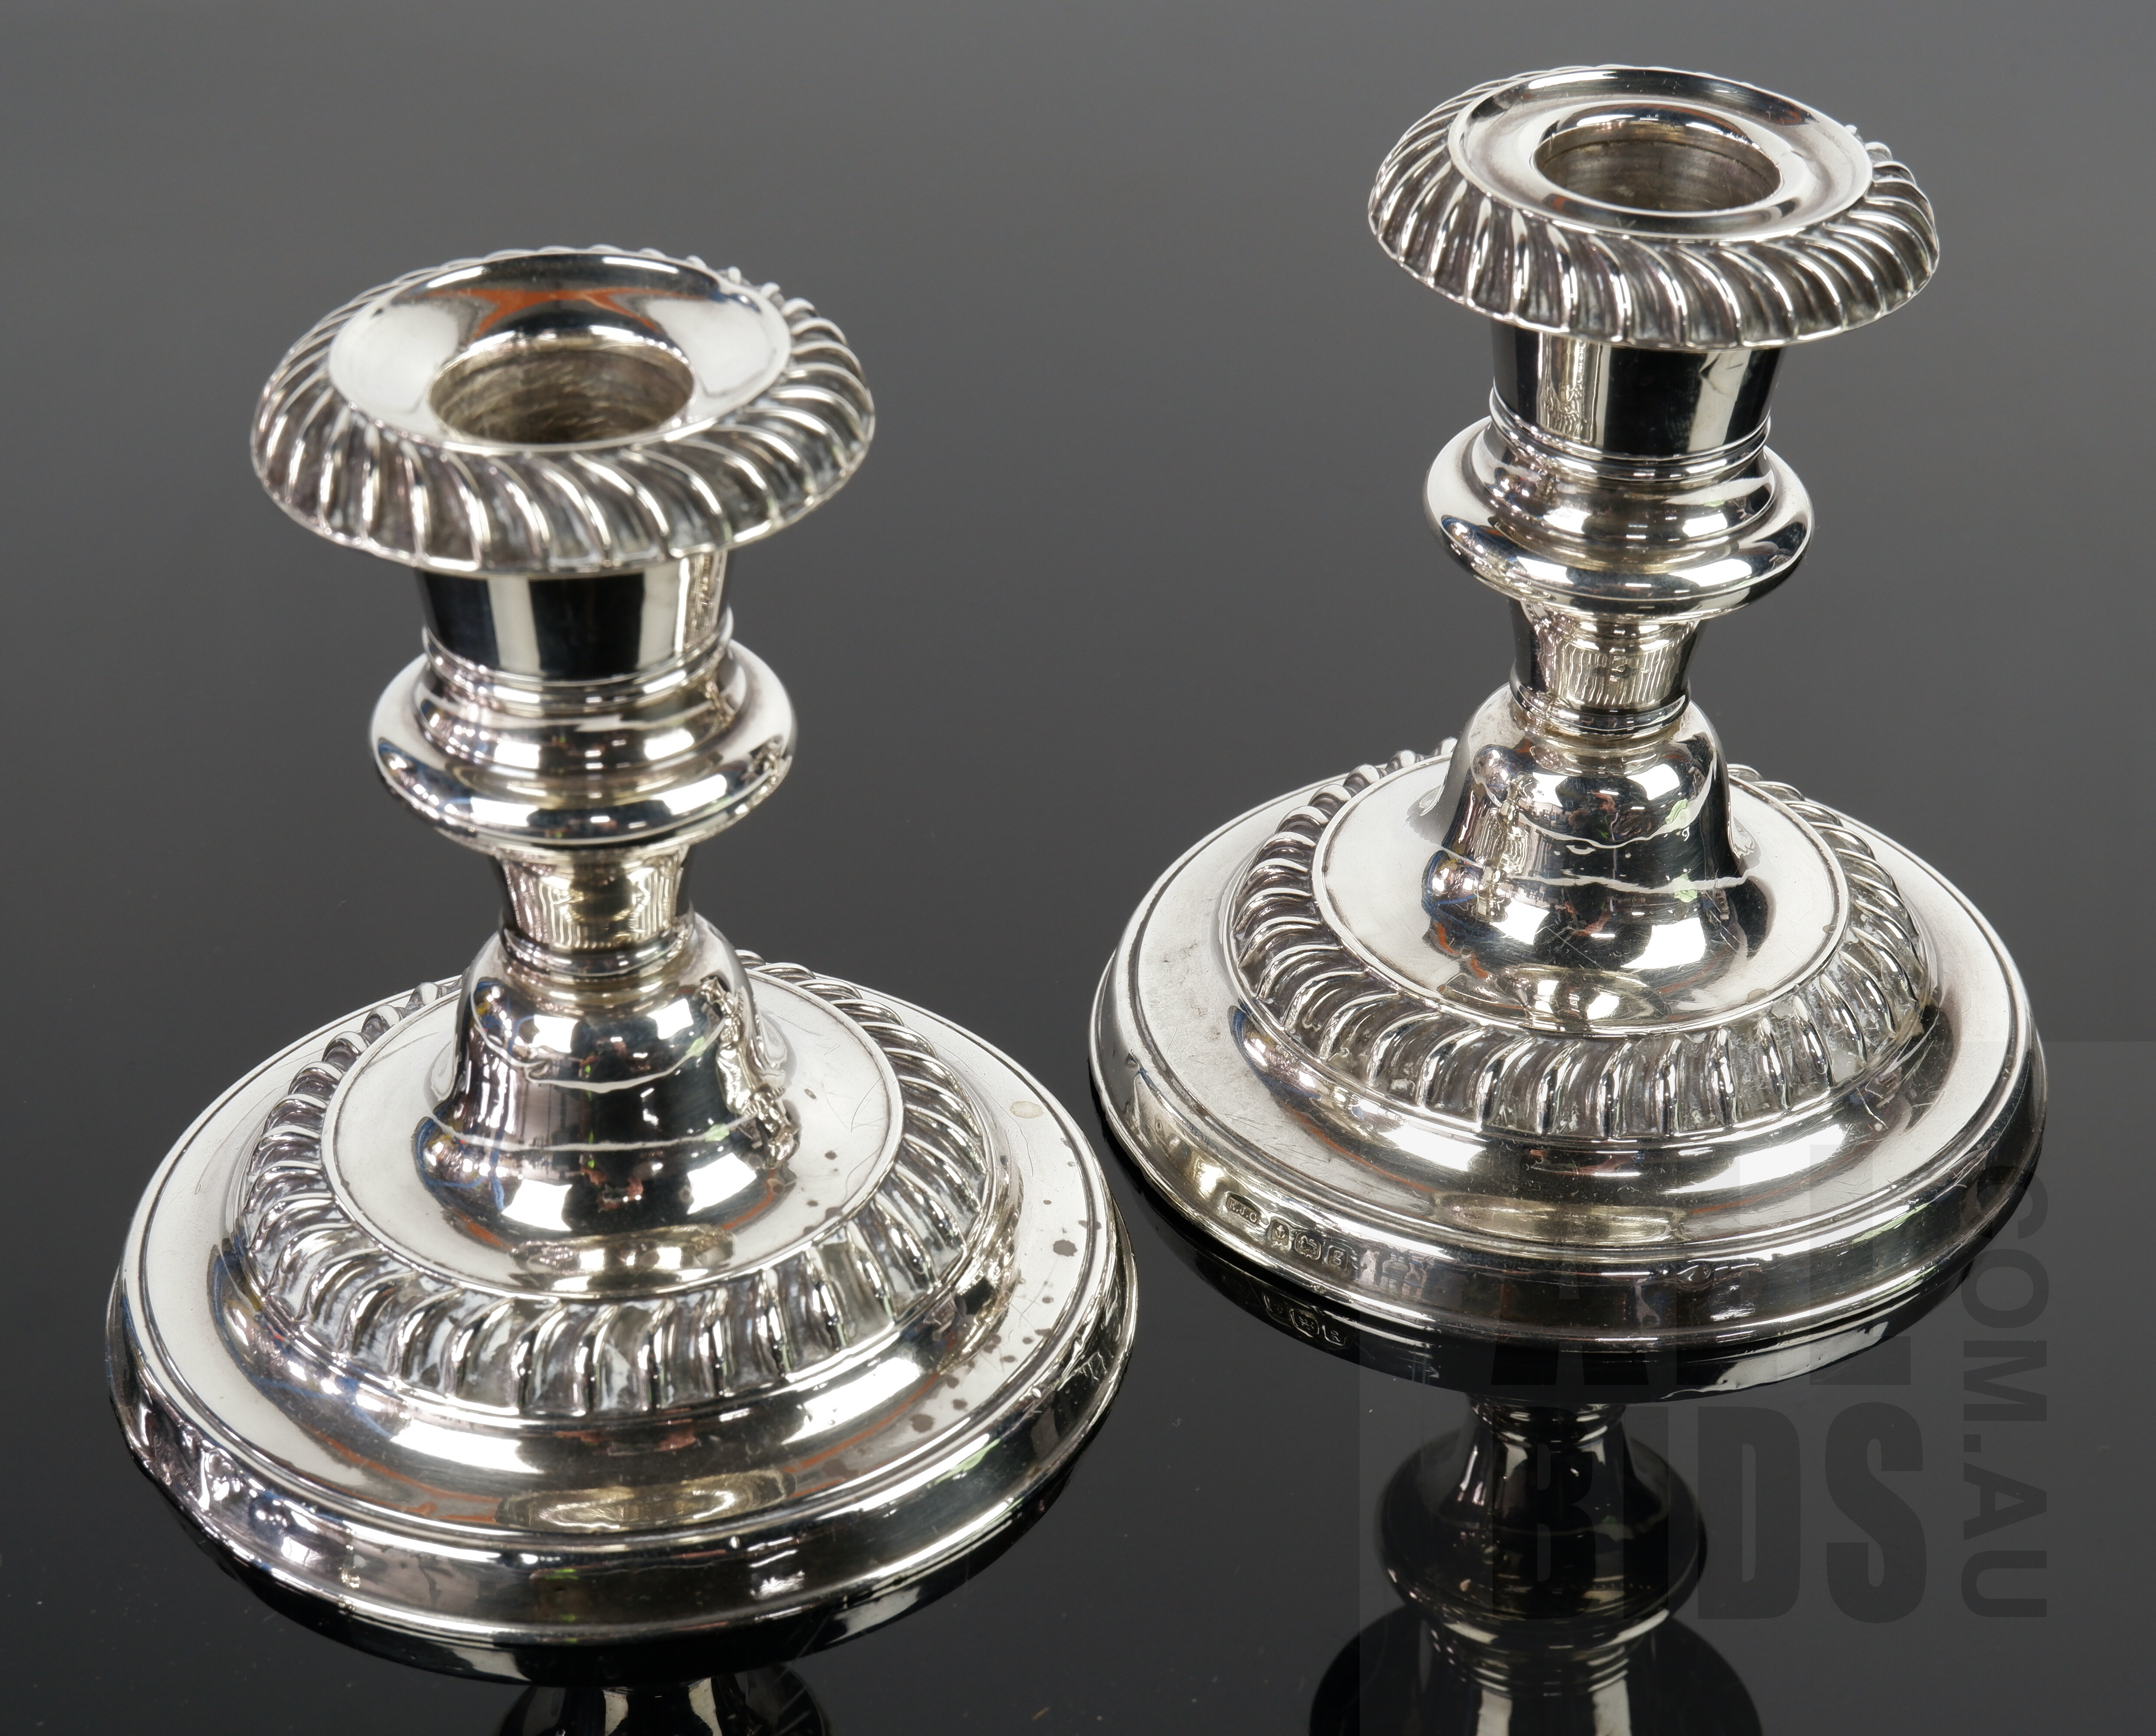 'Pair of Weighted Sterling Silver Candle Sticks, London, Ellis & Co, 1902'